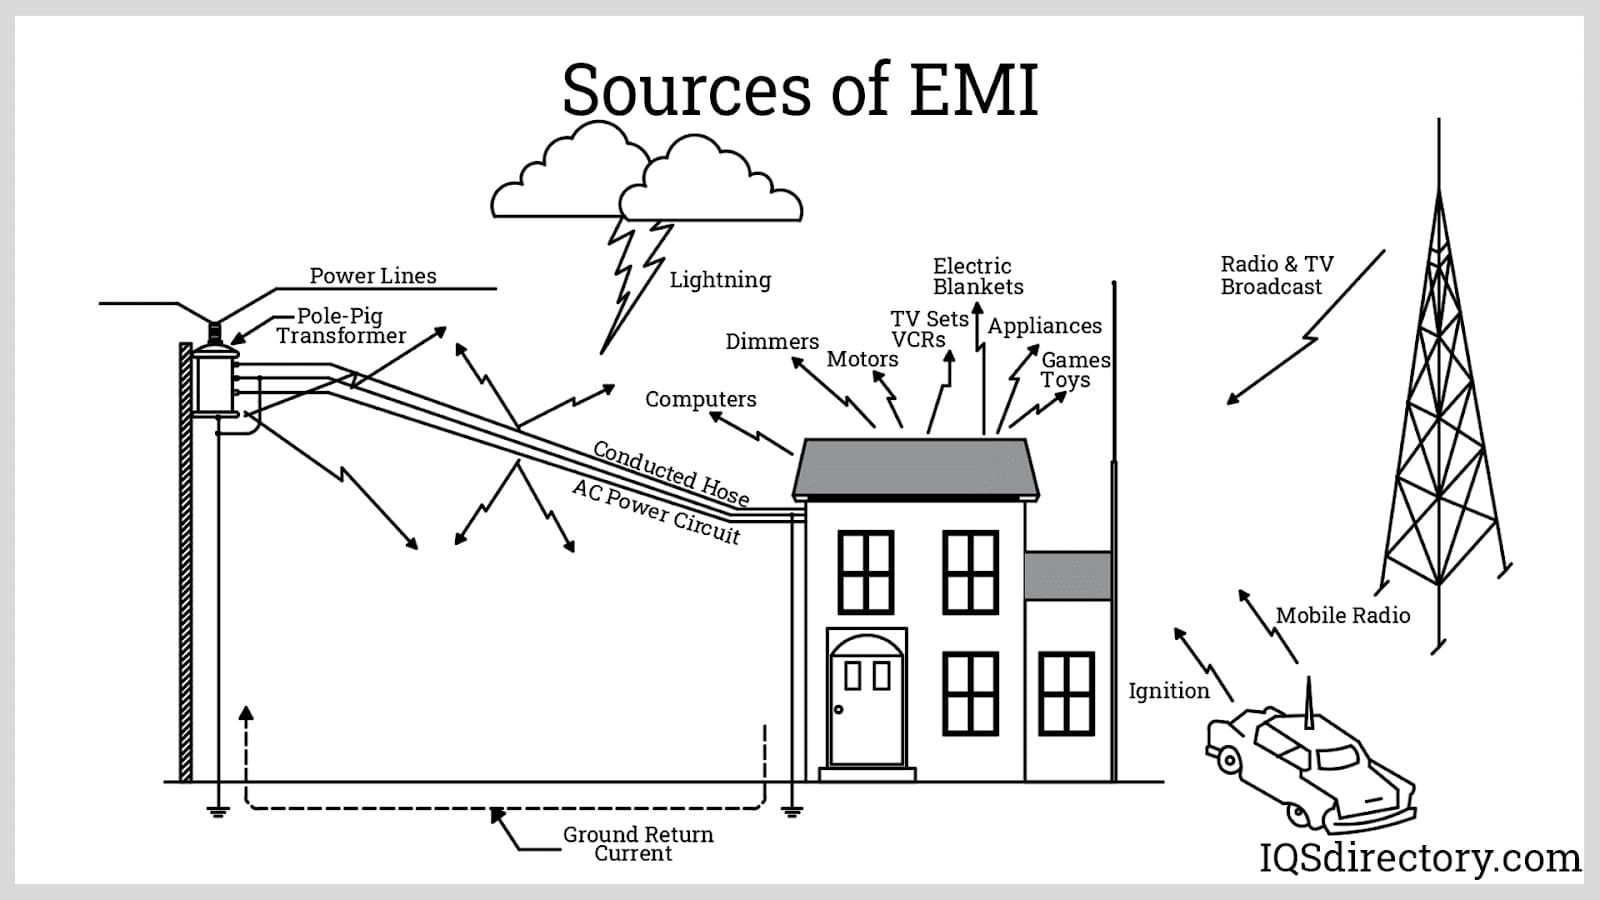 Sources of EMI